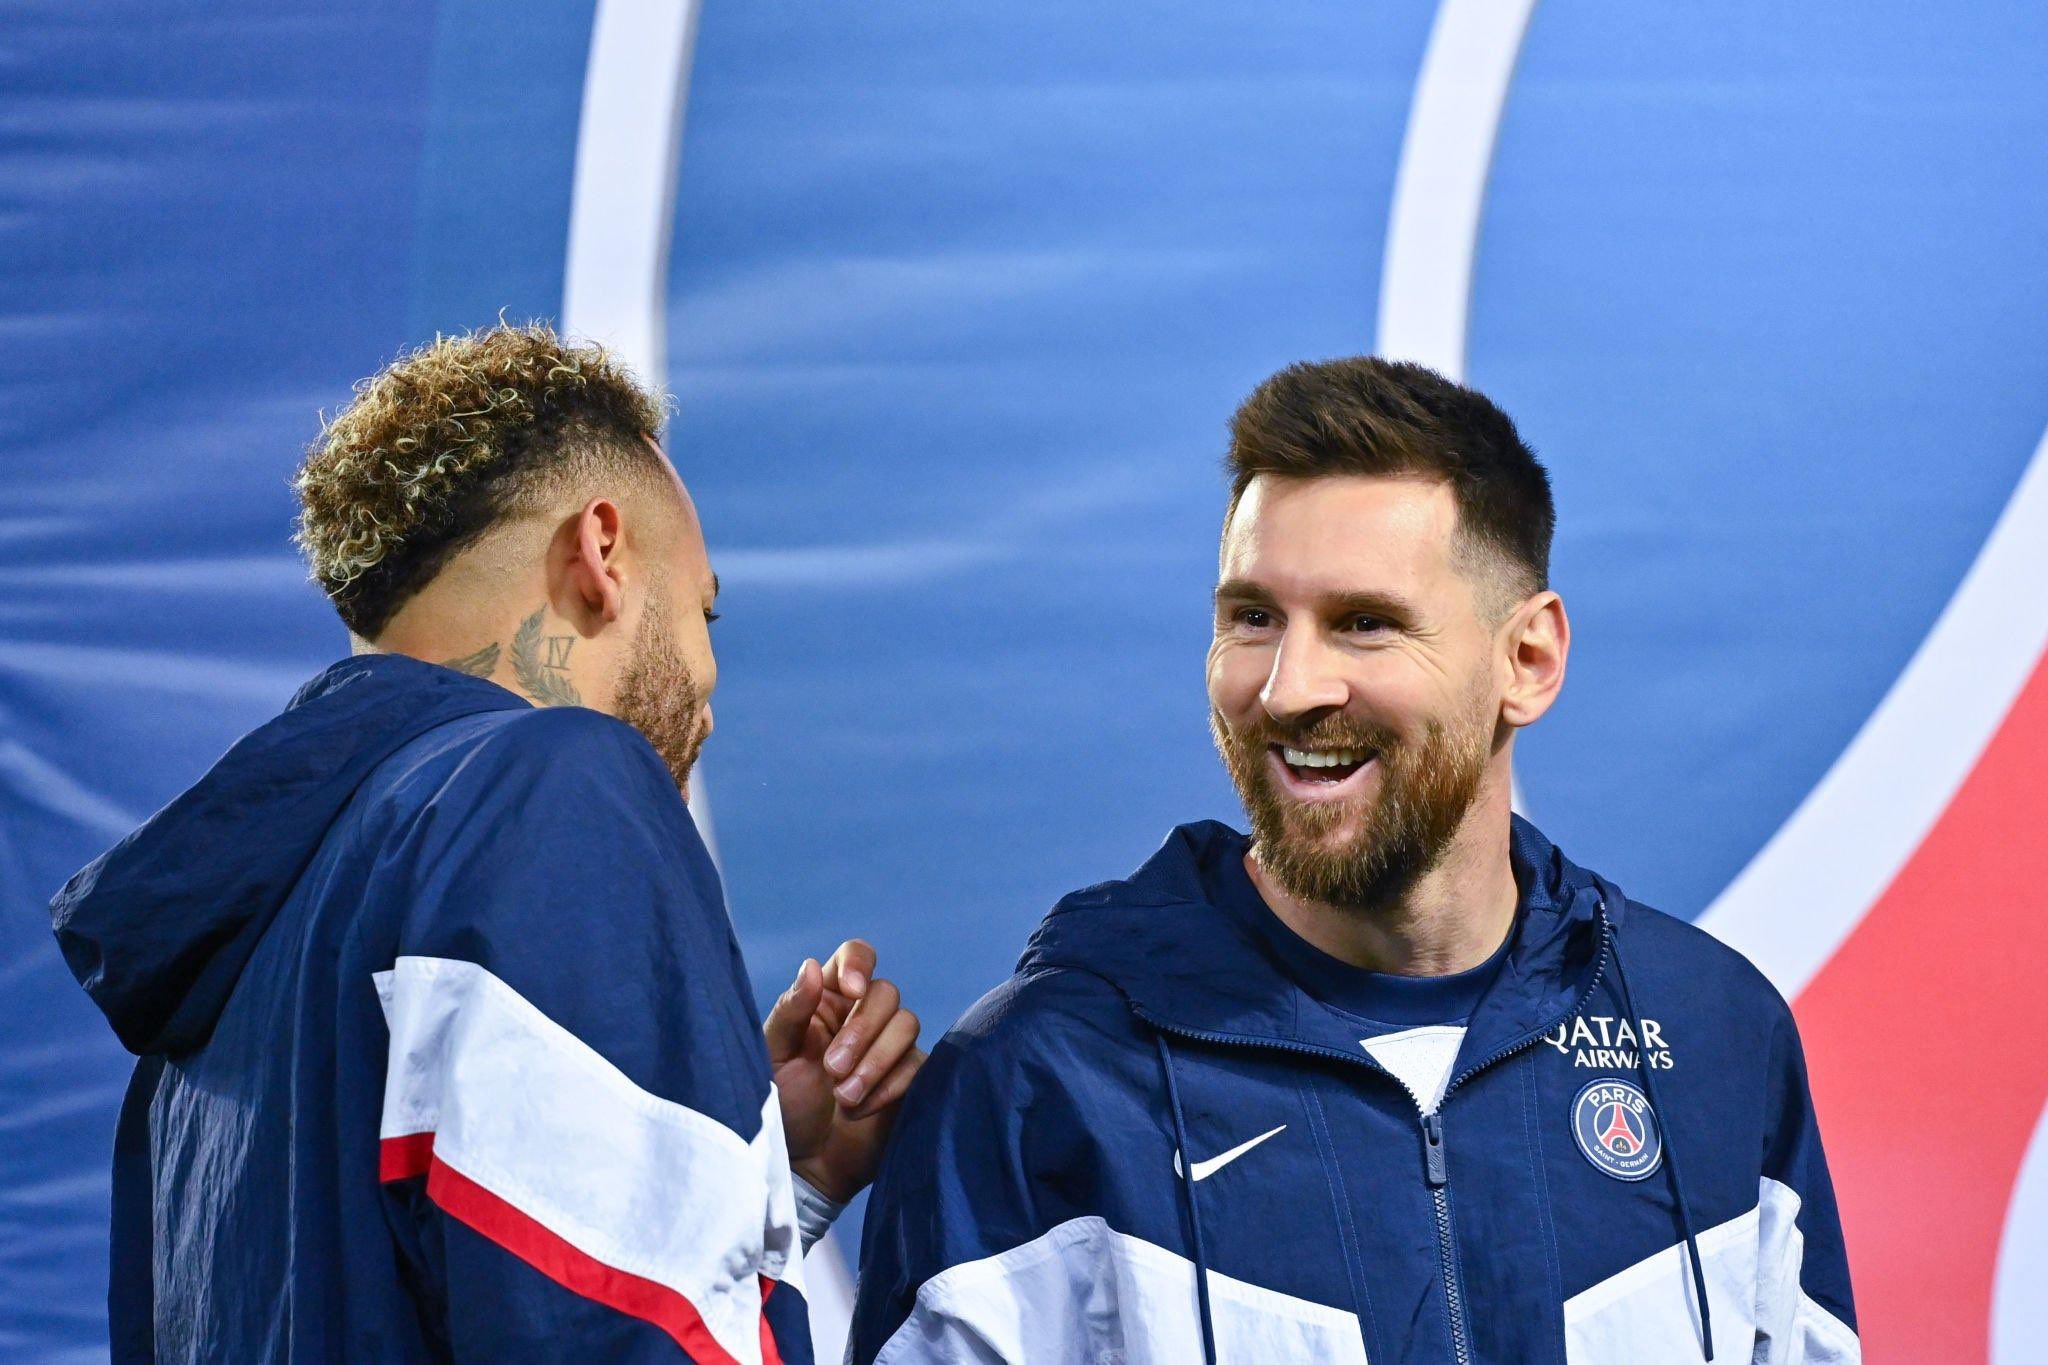 Lionel Messi has verbal pact to leave PSG as early as January as